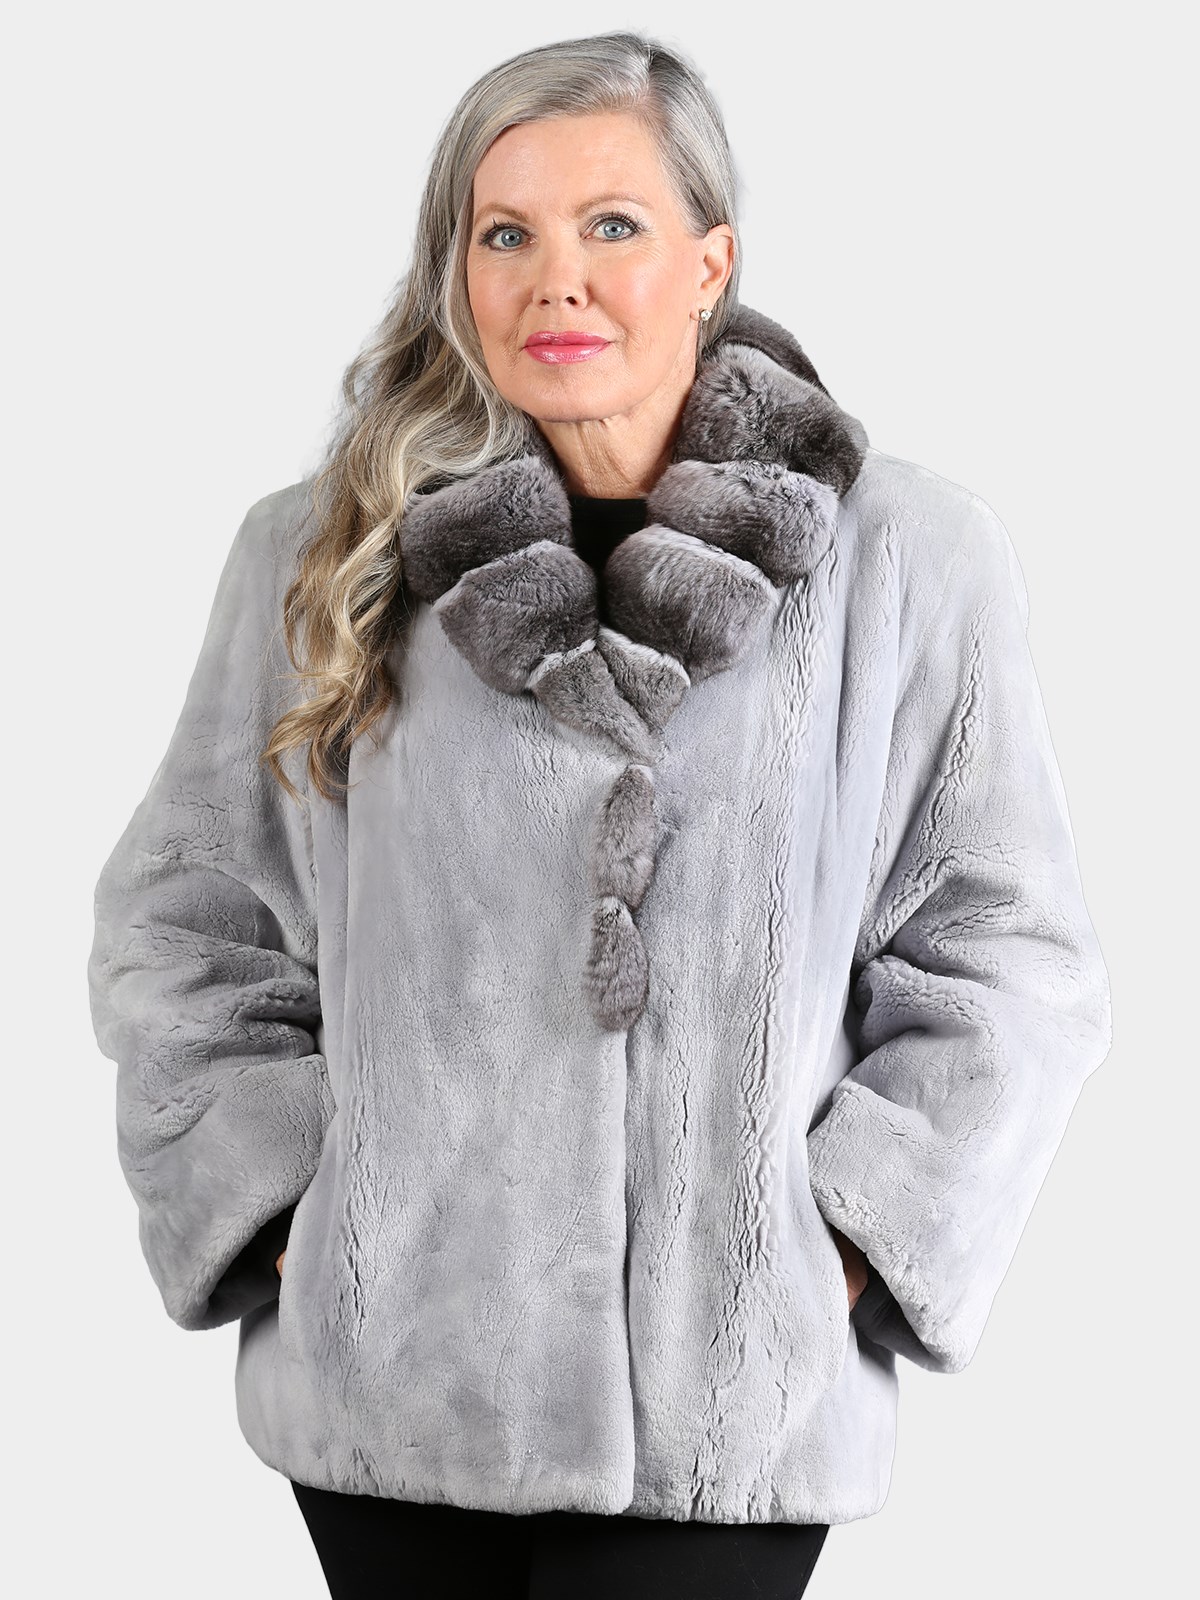 Woman's Dyed Light Grey Sheared Beaver Fur Jacket with Chinchilla Collar